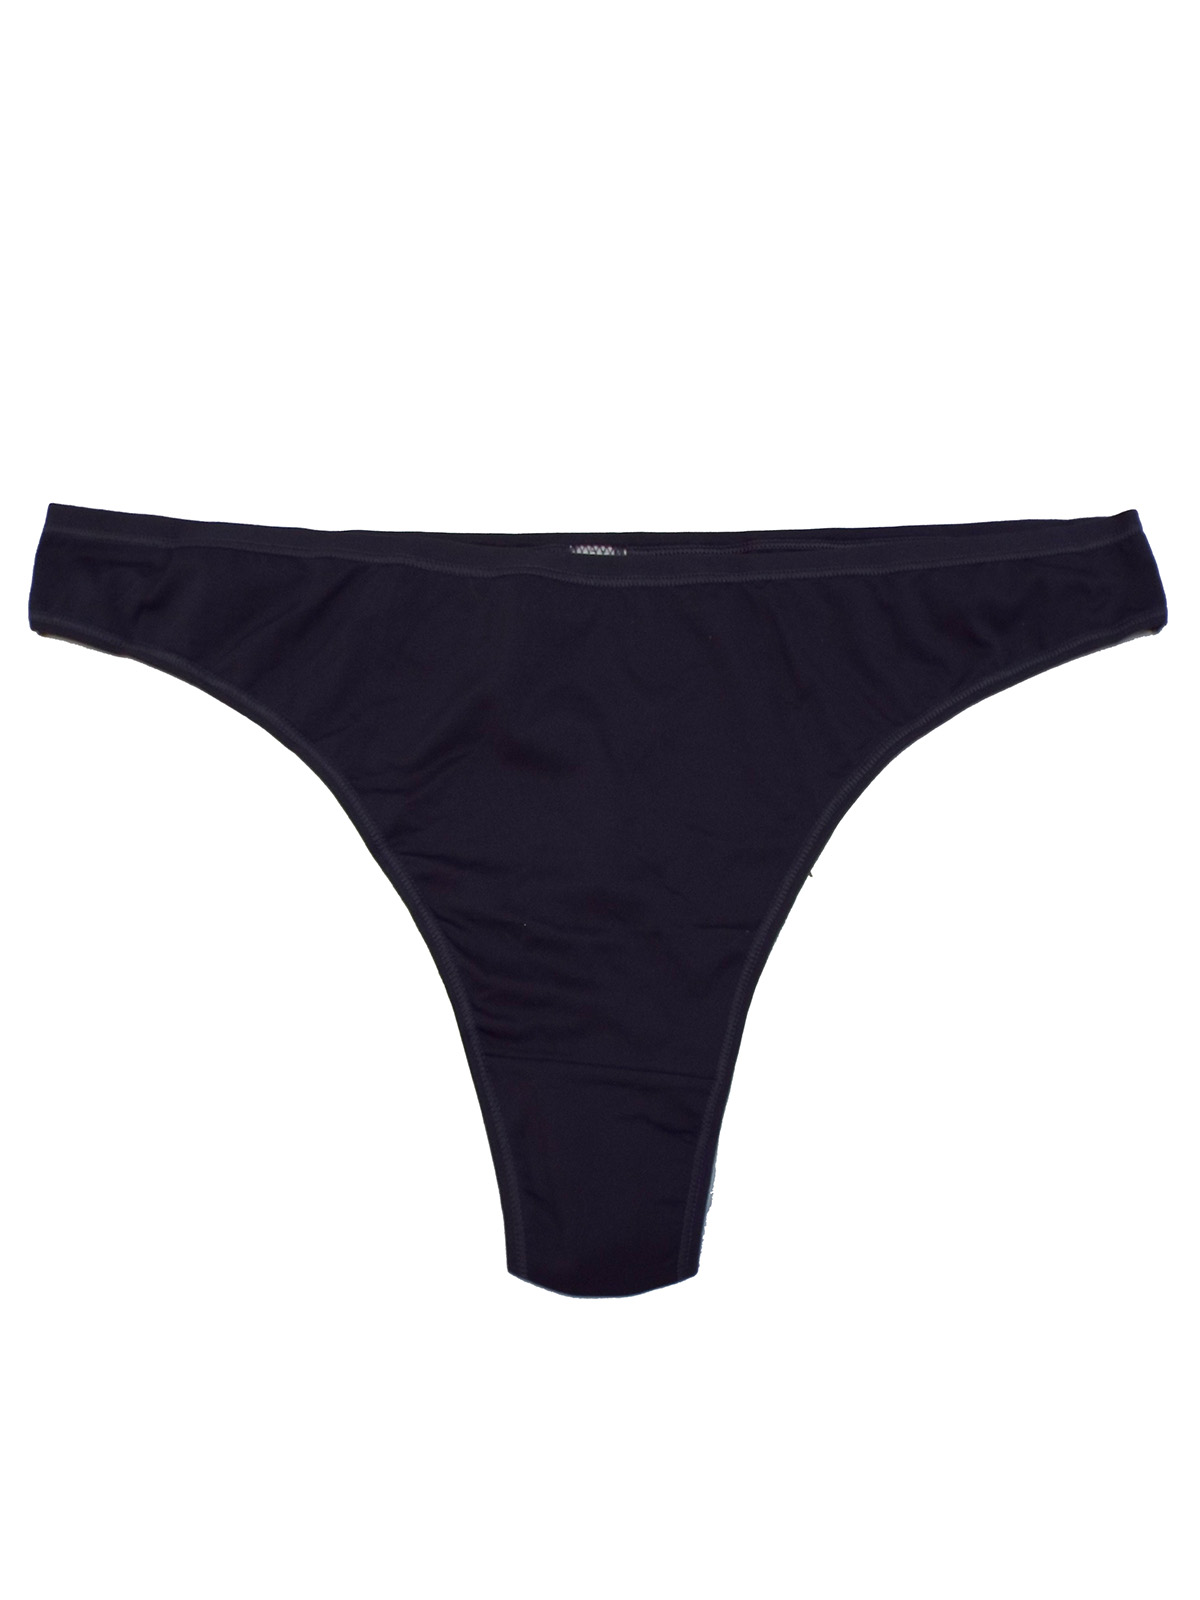 Marks and Spencer - - M&5 DAMSON High Rise Thong - Plus Size 16 to 20